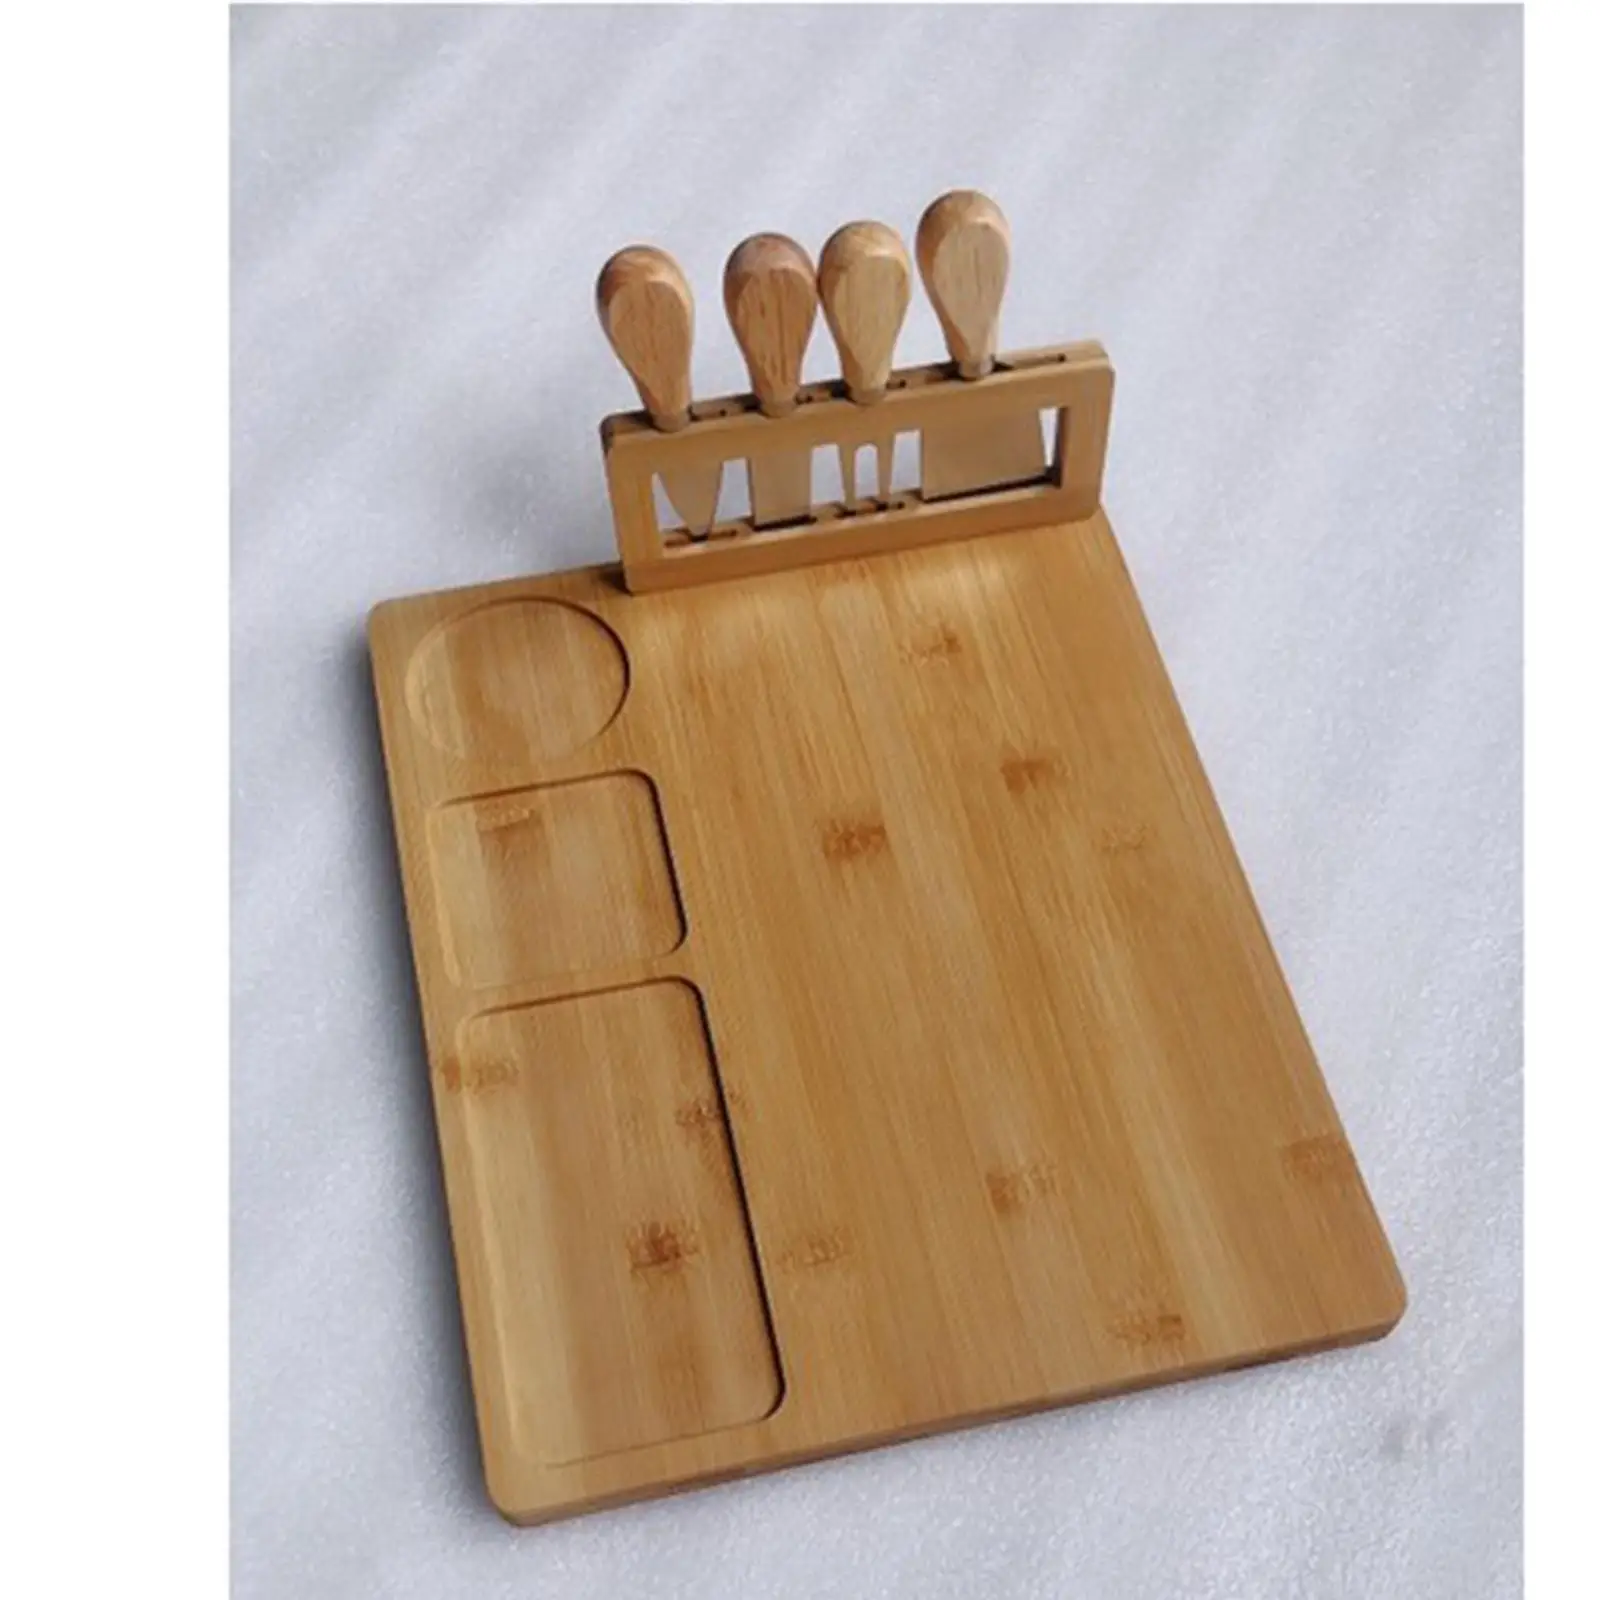 Wooden Platter Bamboo Cheese Board Set  with Cutter Serving Meat Board for Housewarming Anniversary Birthday Christmas Kitchen